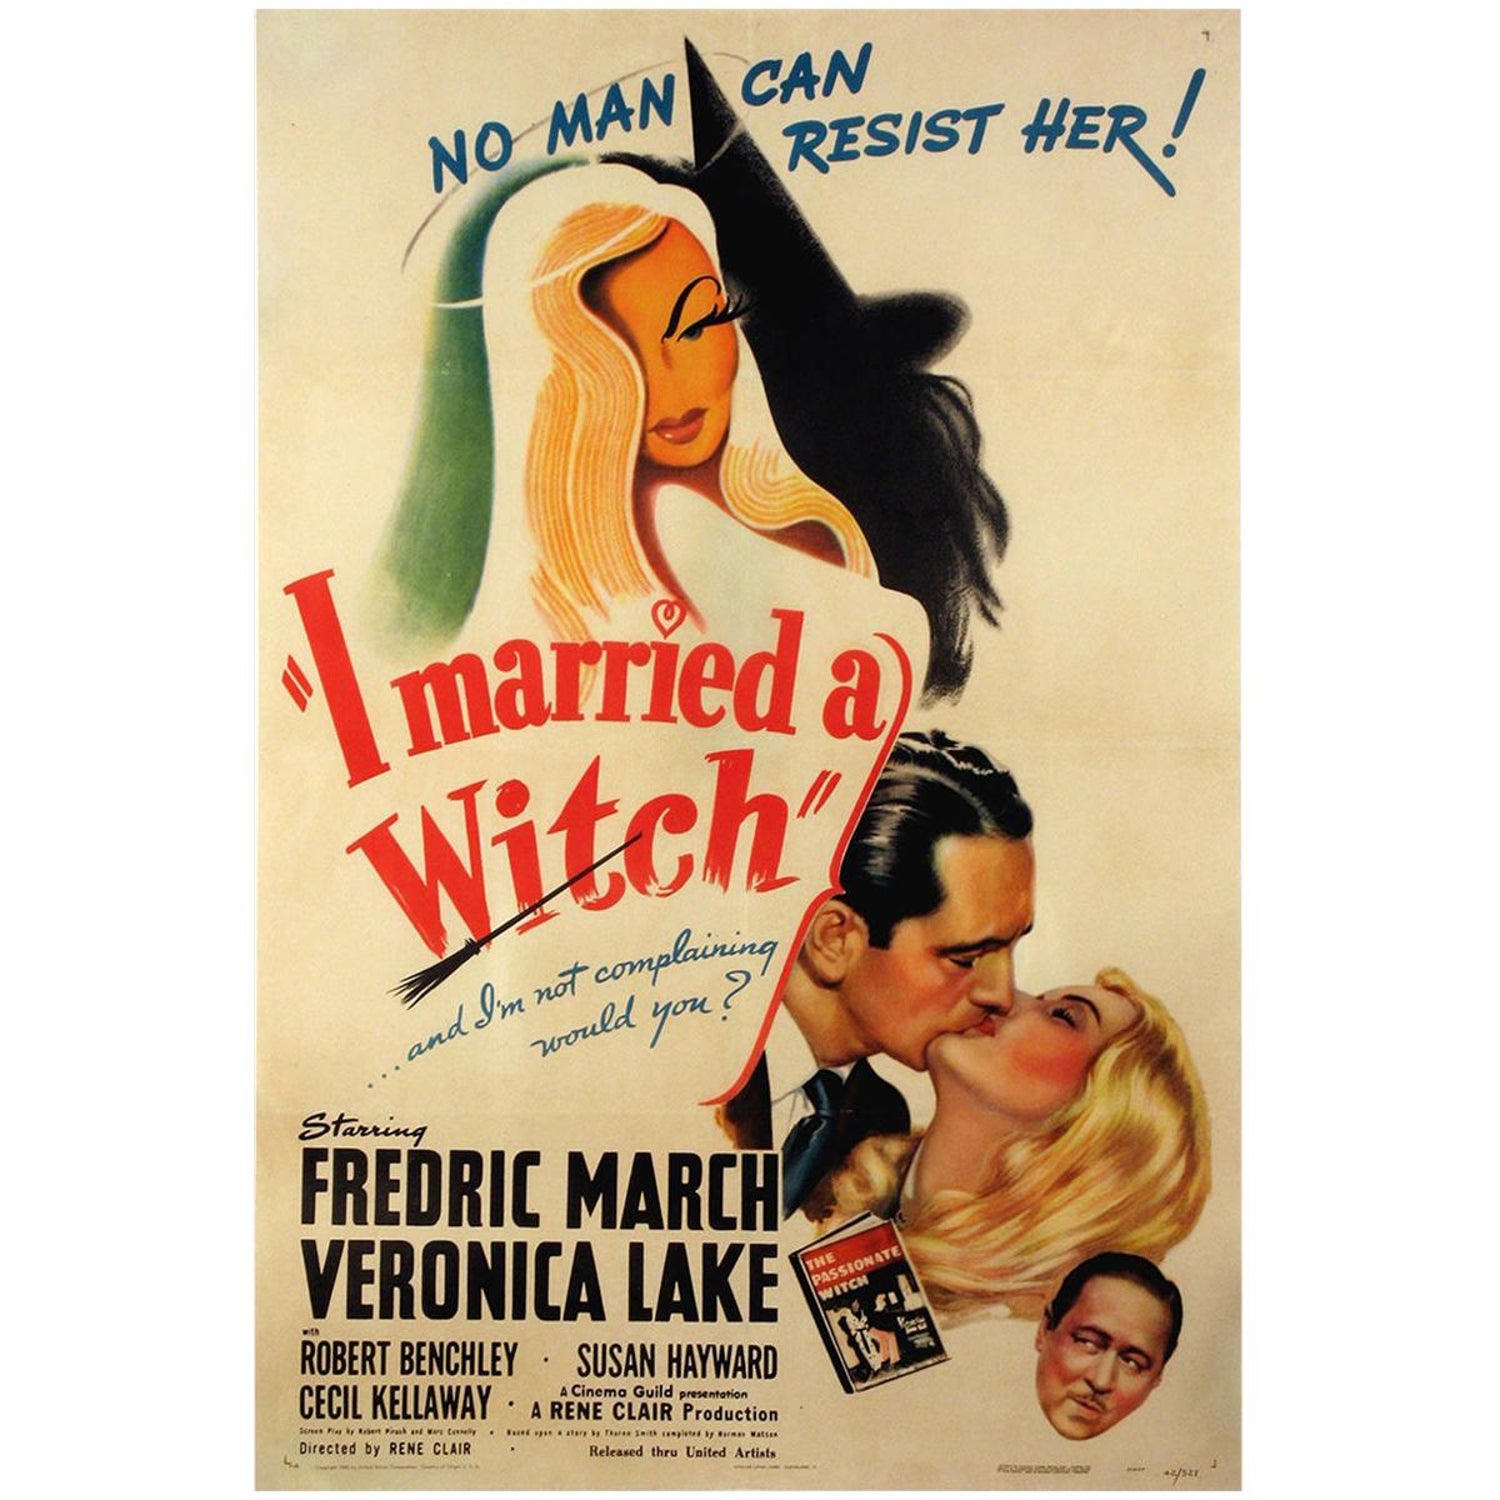 Fredric March A I Married a Witch Movie POSTER 11 x 17 Veronica Lake